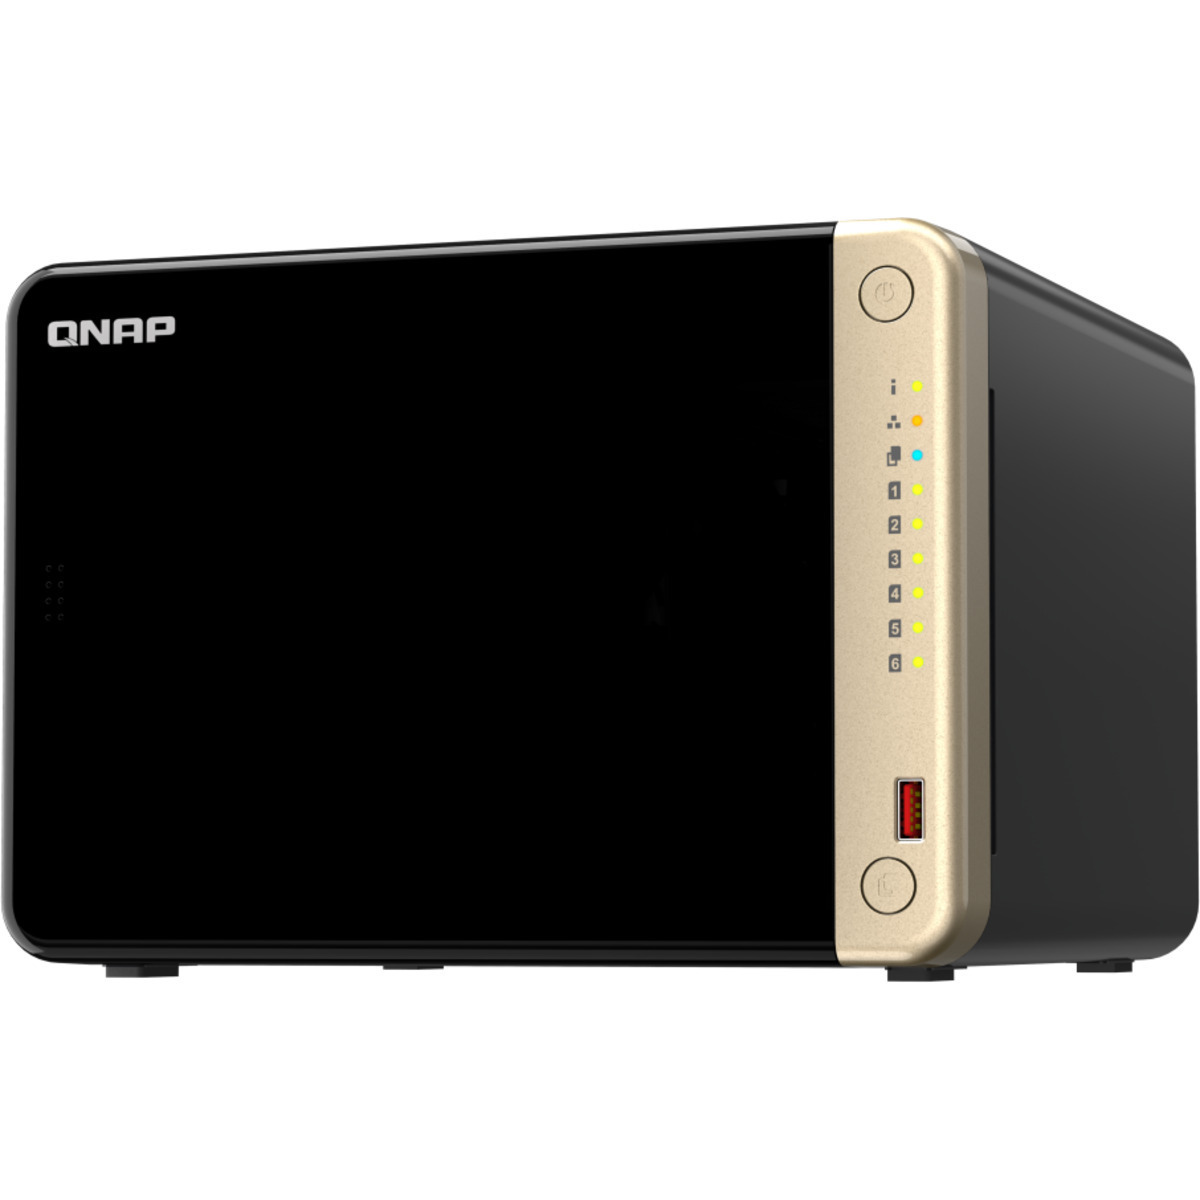 QNAP TS-664 80tb 6-Bay Desktop Multimedia / Power User / Business NAS - Network Attached Storage Device 4x20tb Seagate IronWolf Pro ST20000NT001 3.5 7200rpm SATA 6Gb/s HDD NAS Class Drives Installed - Burn-In Tested TS-664